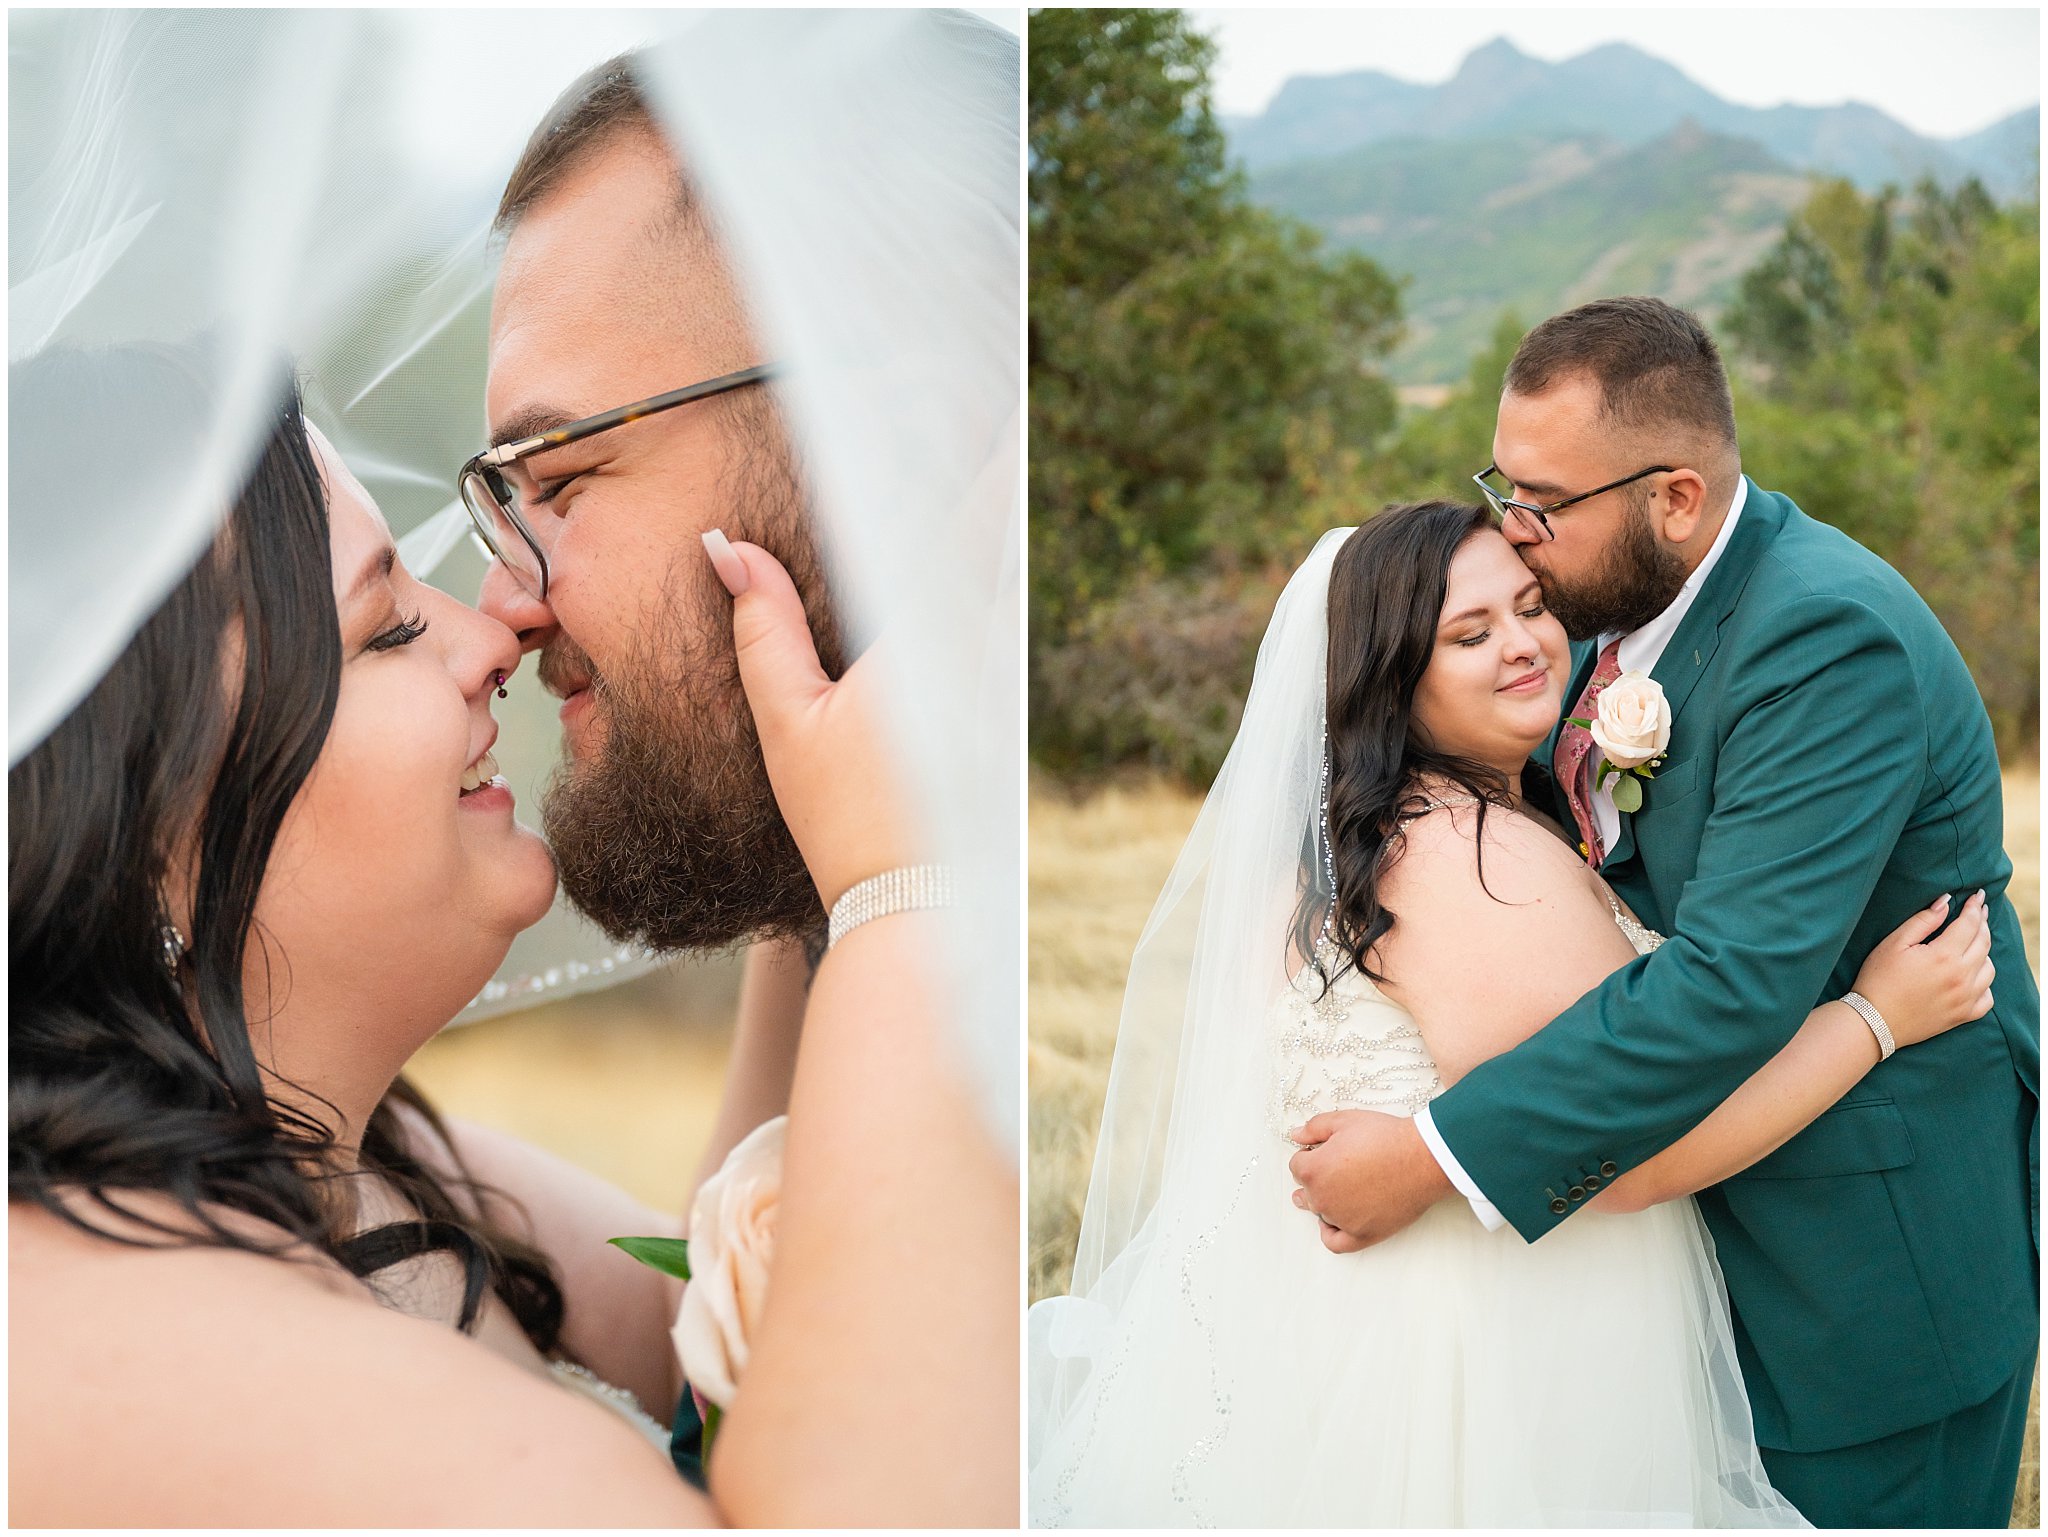 Bride and groom couple's portraits in the woods. Wearing a green suit with salmon pink tie | Green and Salmon Pink Utah Wedding | Oak Hills | Jessie and Dallin Photography